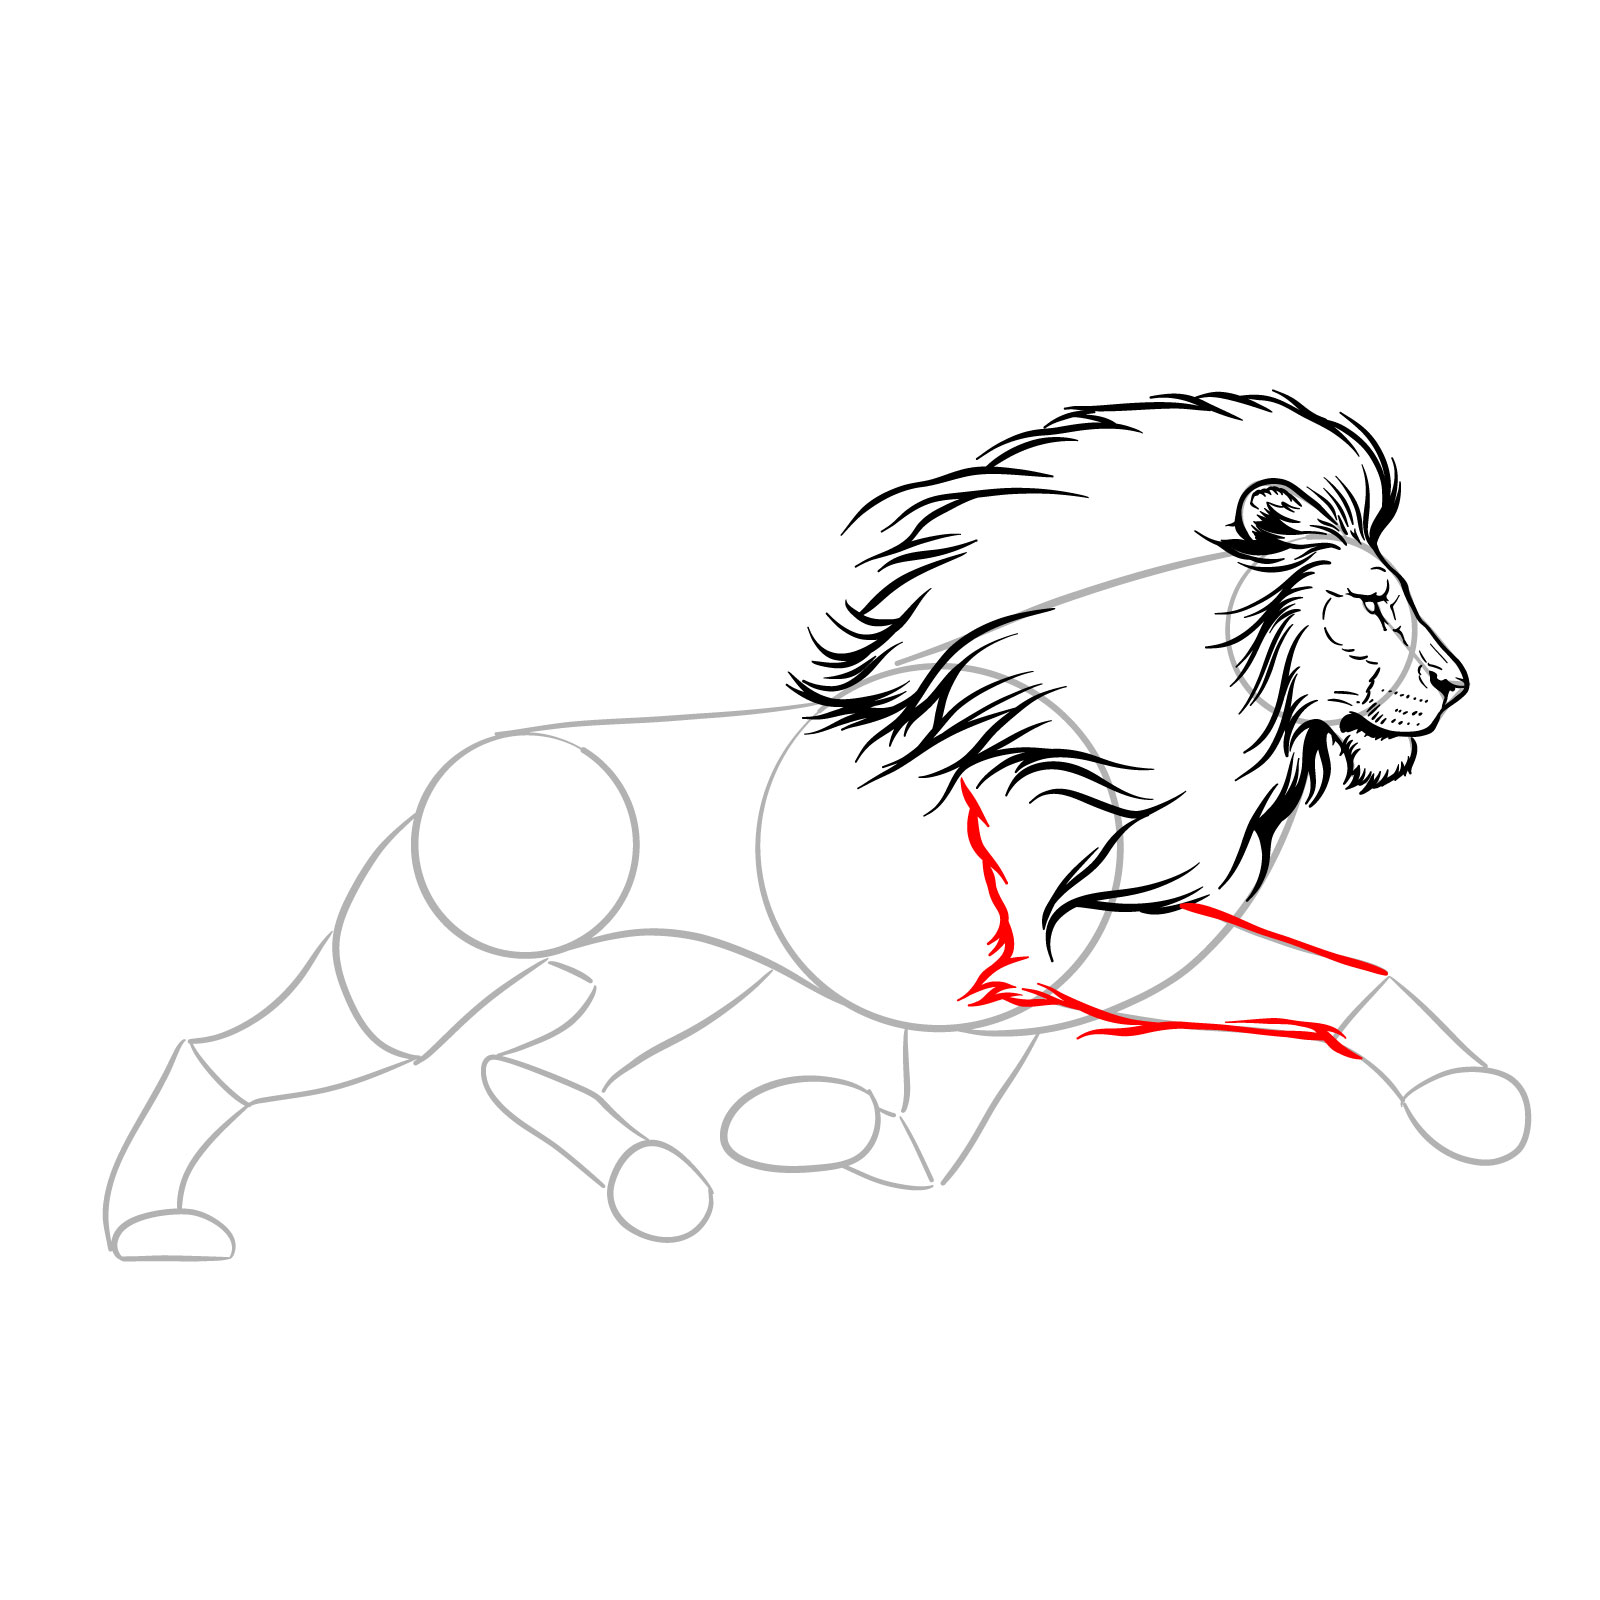 Sketching the initial segment of a lion's front leg in motion - step 09